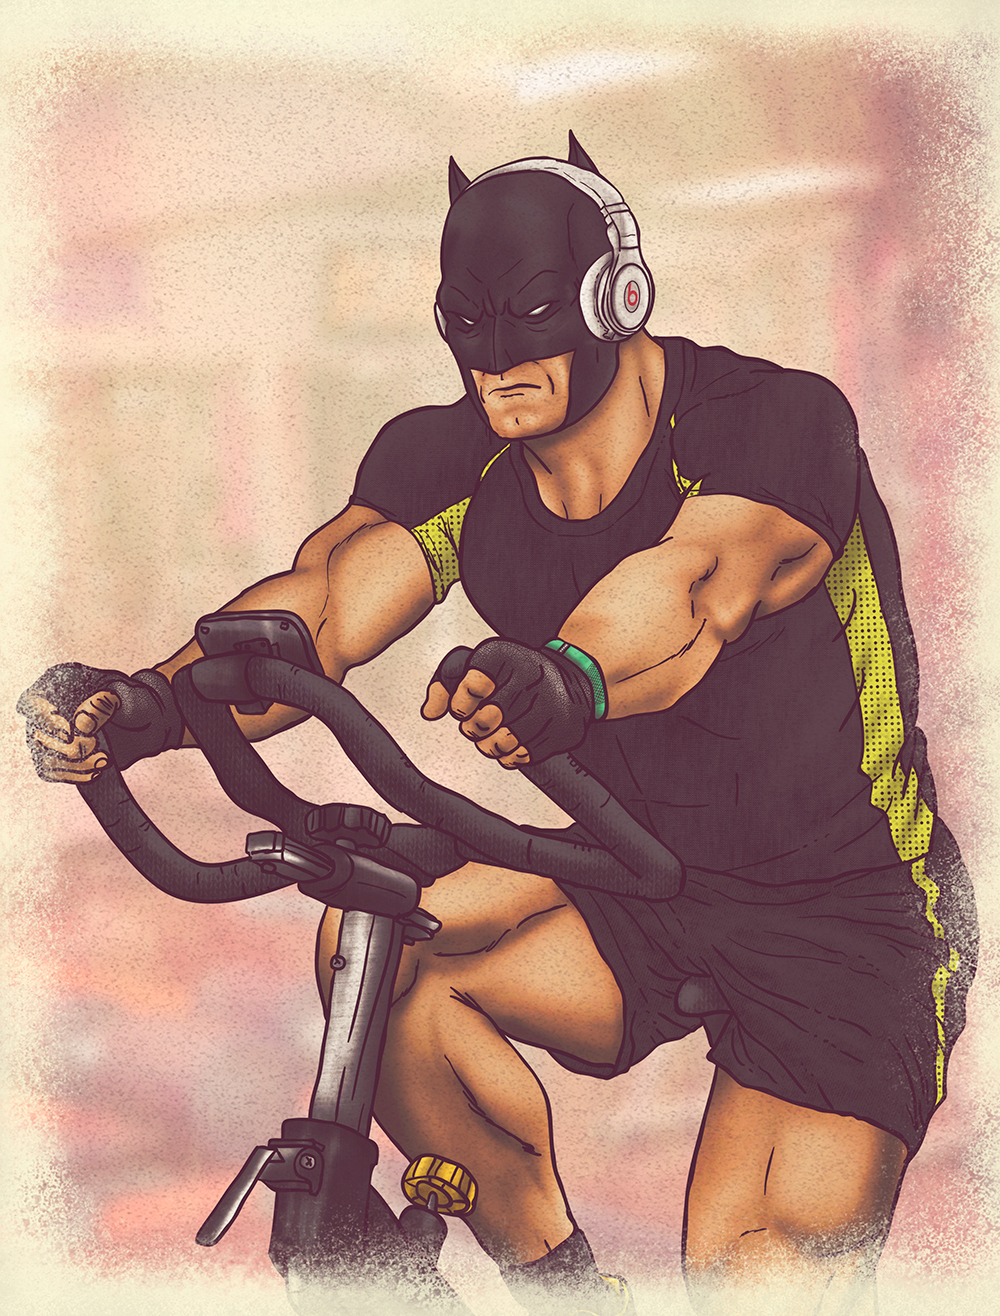 To help us understand what goes into maintaining a superhero physique we......